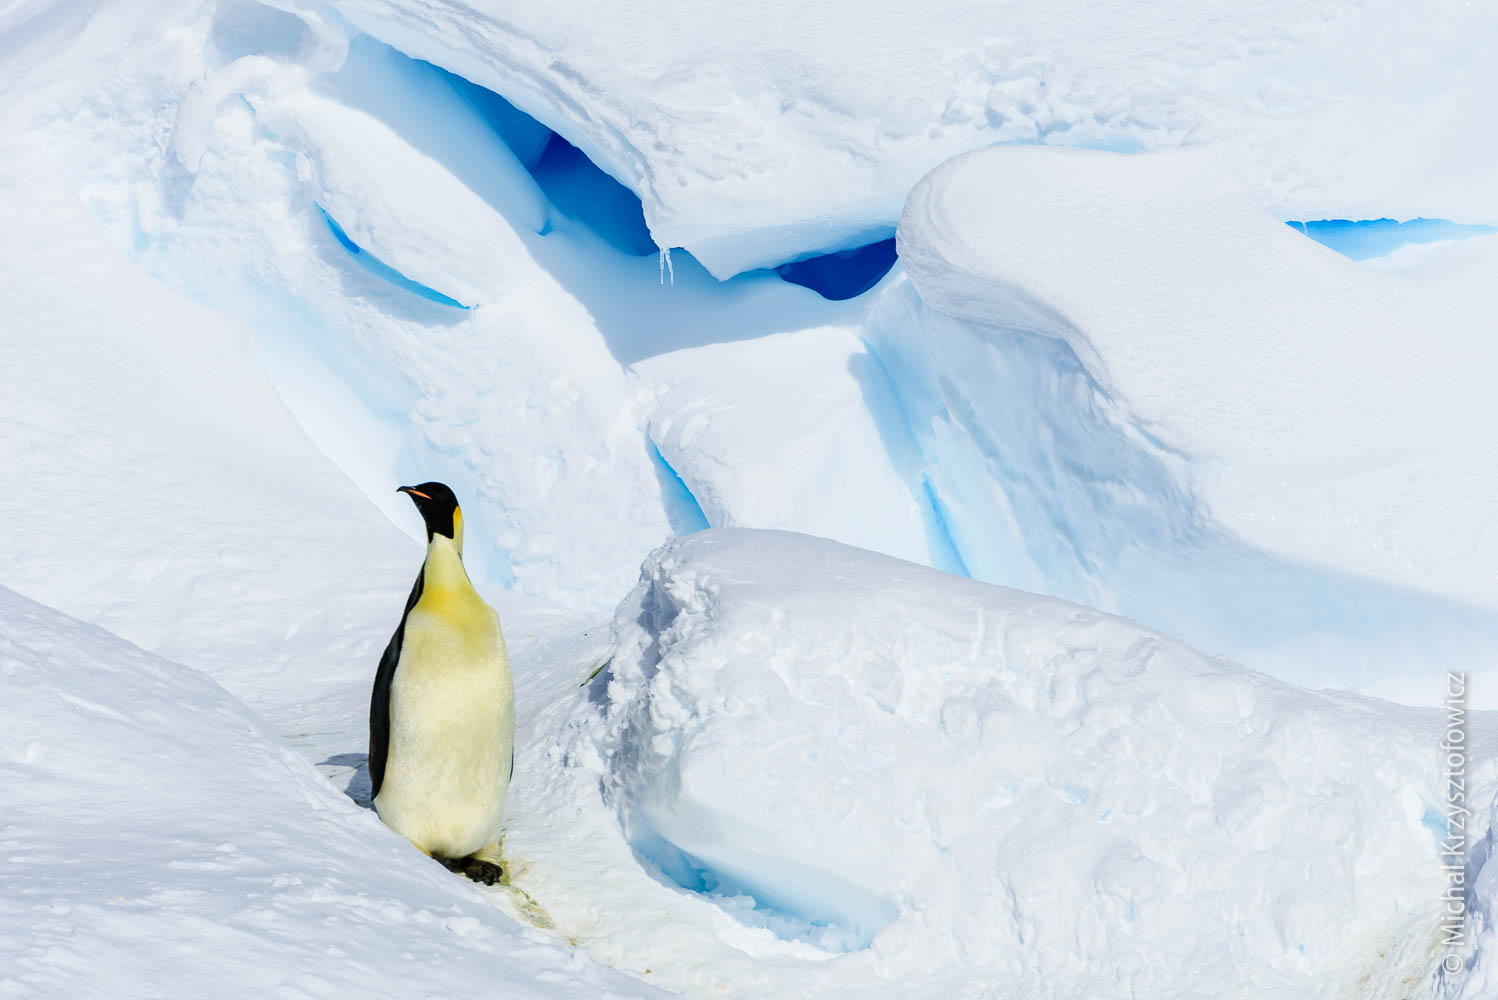 Another trip to Emperor Penguins